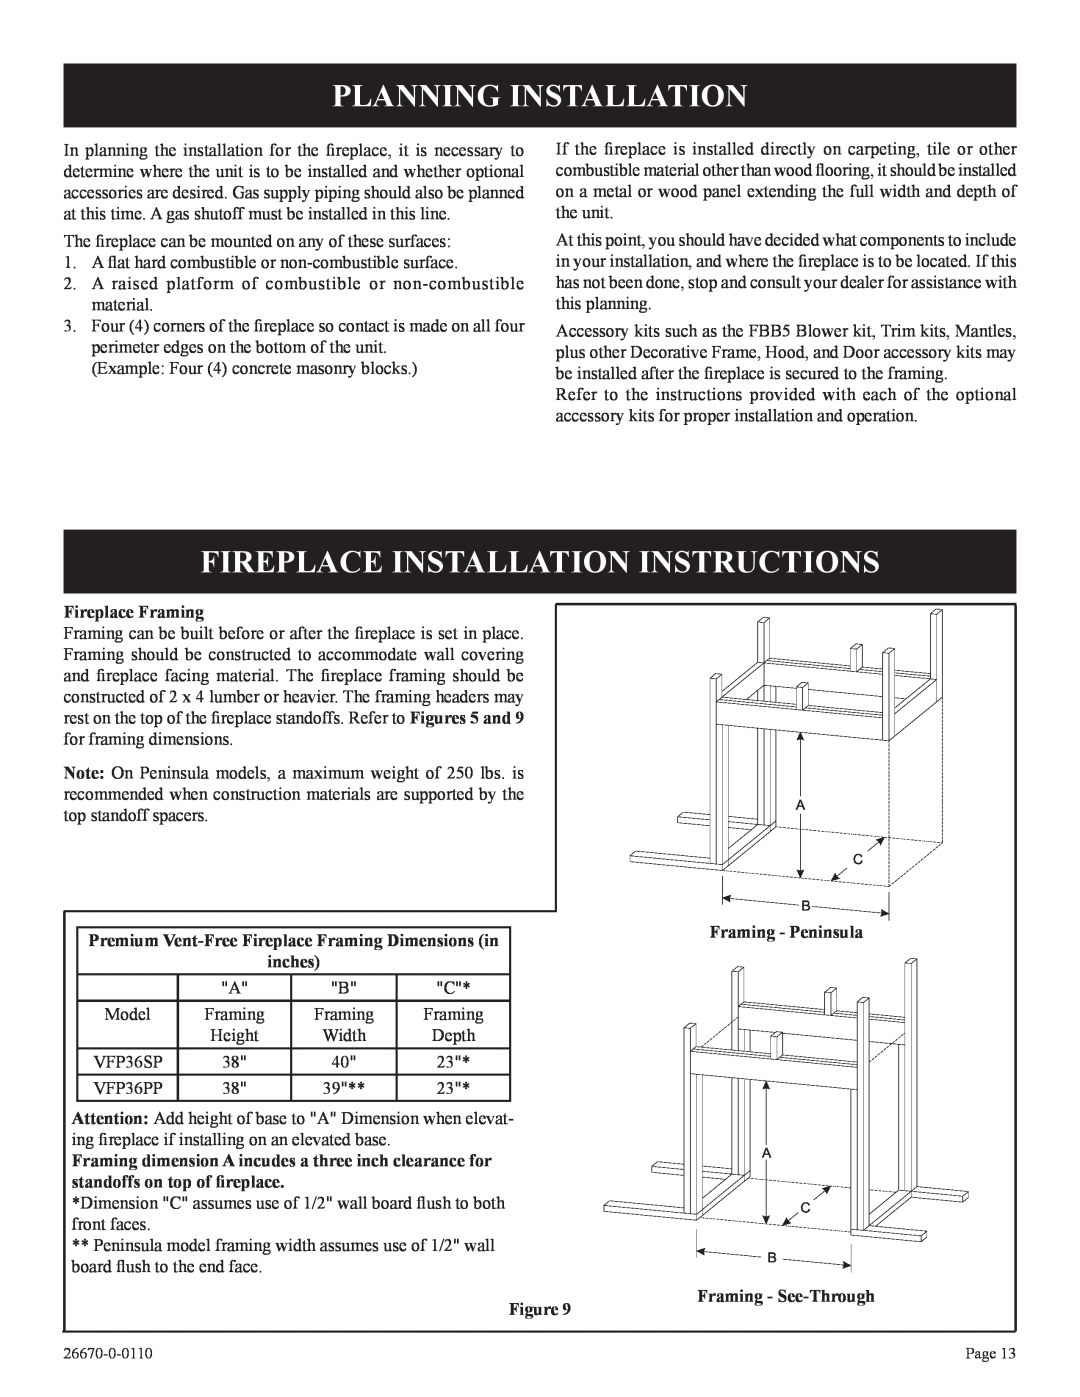 Empire Comfort Systems VFP36PP32EN-2 Planning Installation, Fireplace Installation Instructions, Fireplace Framing, inches 